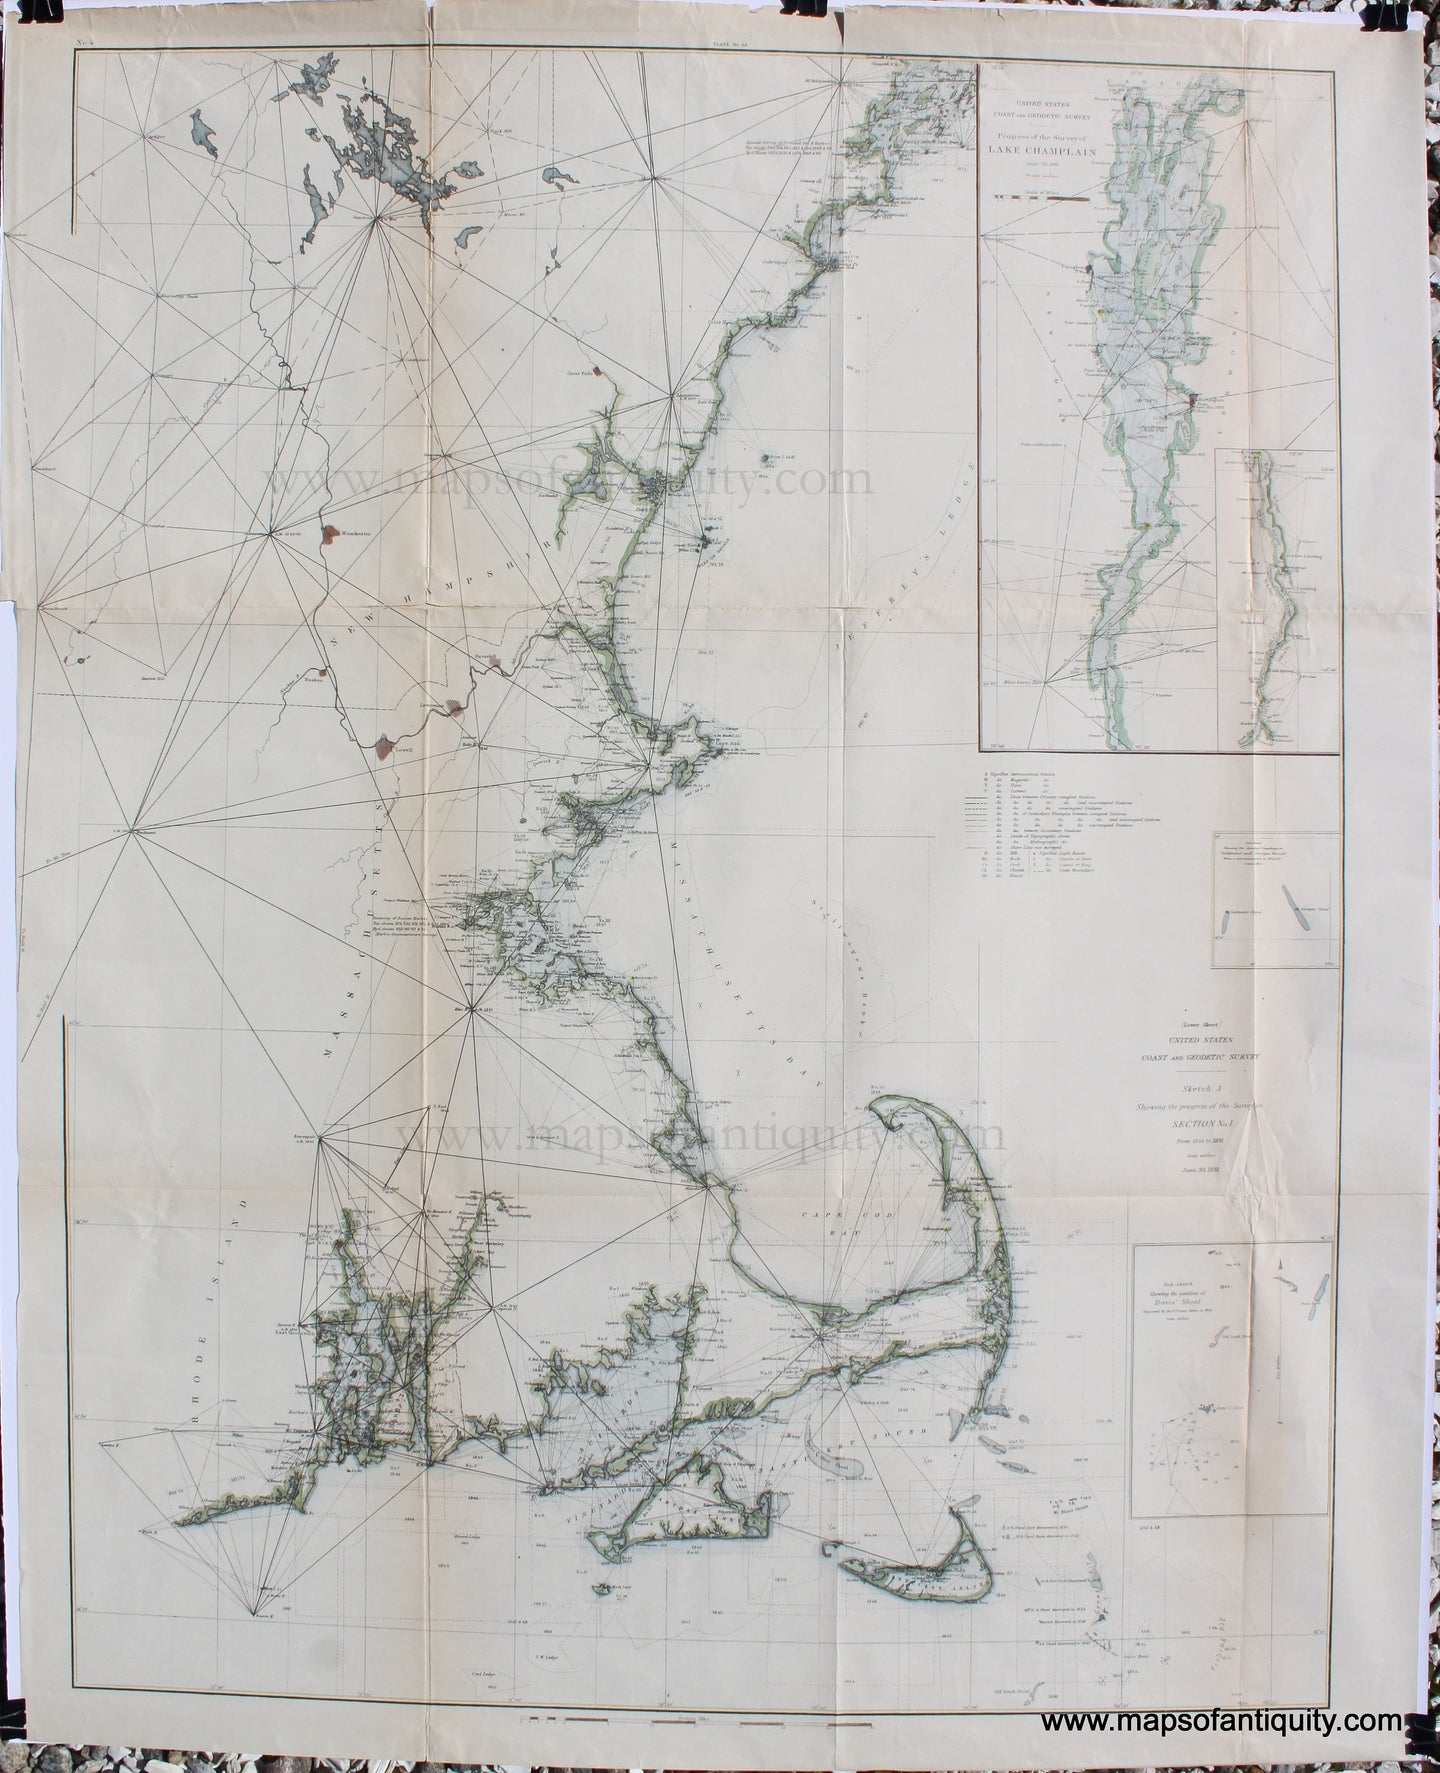 Hand-Colored-Antique-Nautical-Chart-Northeast-Coast-United-States-Coast-Survey-Sketch-A-Shewing-the-progress-of-the-Survey-in-Section-No.-1-From-1844-to-1881-Antique-Nautical-Charts-and-Coast-Surveys-of-the-WorldÂ -Coastal-Report-Charts-New-England-1881-U.S.-Coast-Survey-Maps-Of-Antiquity